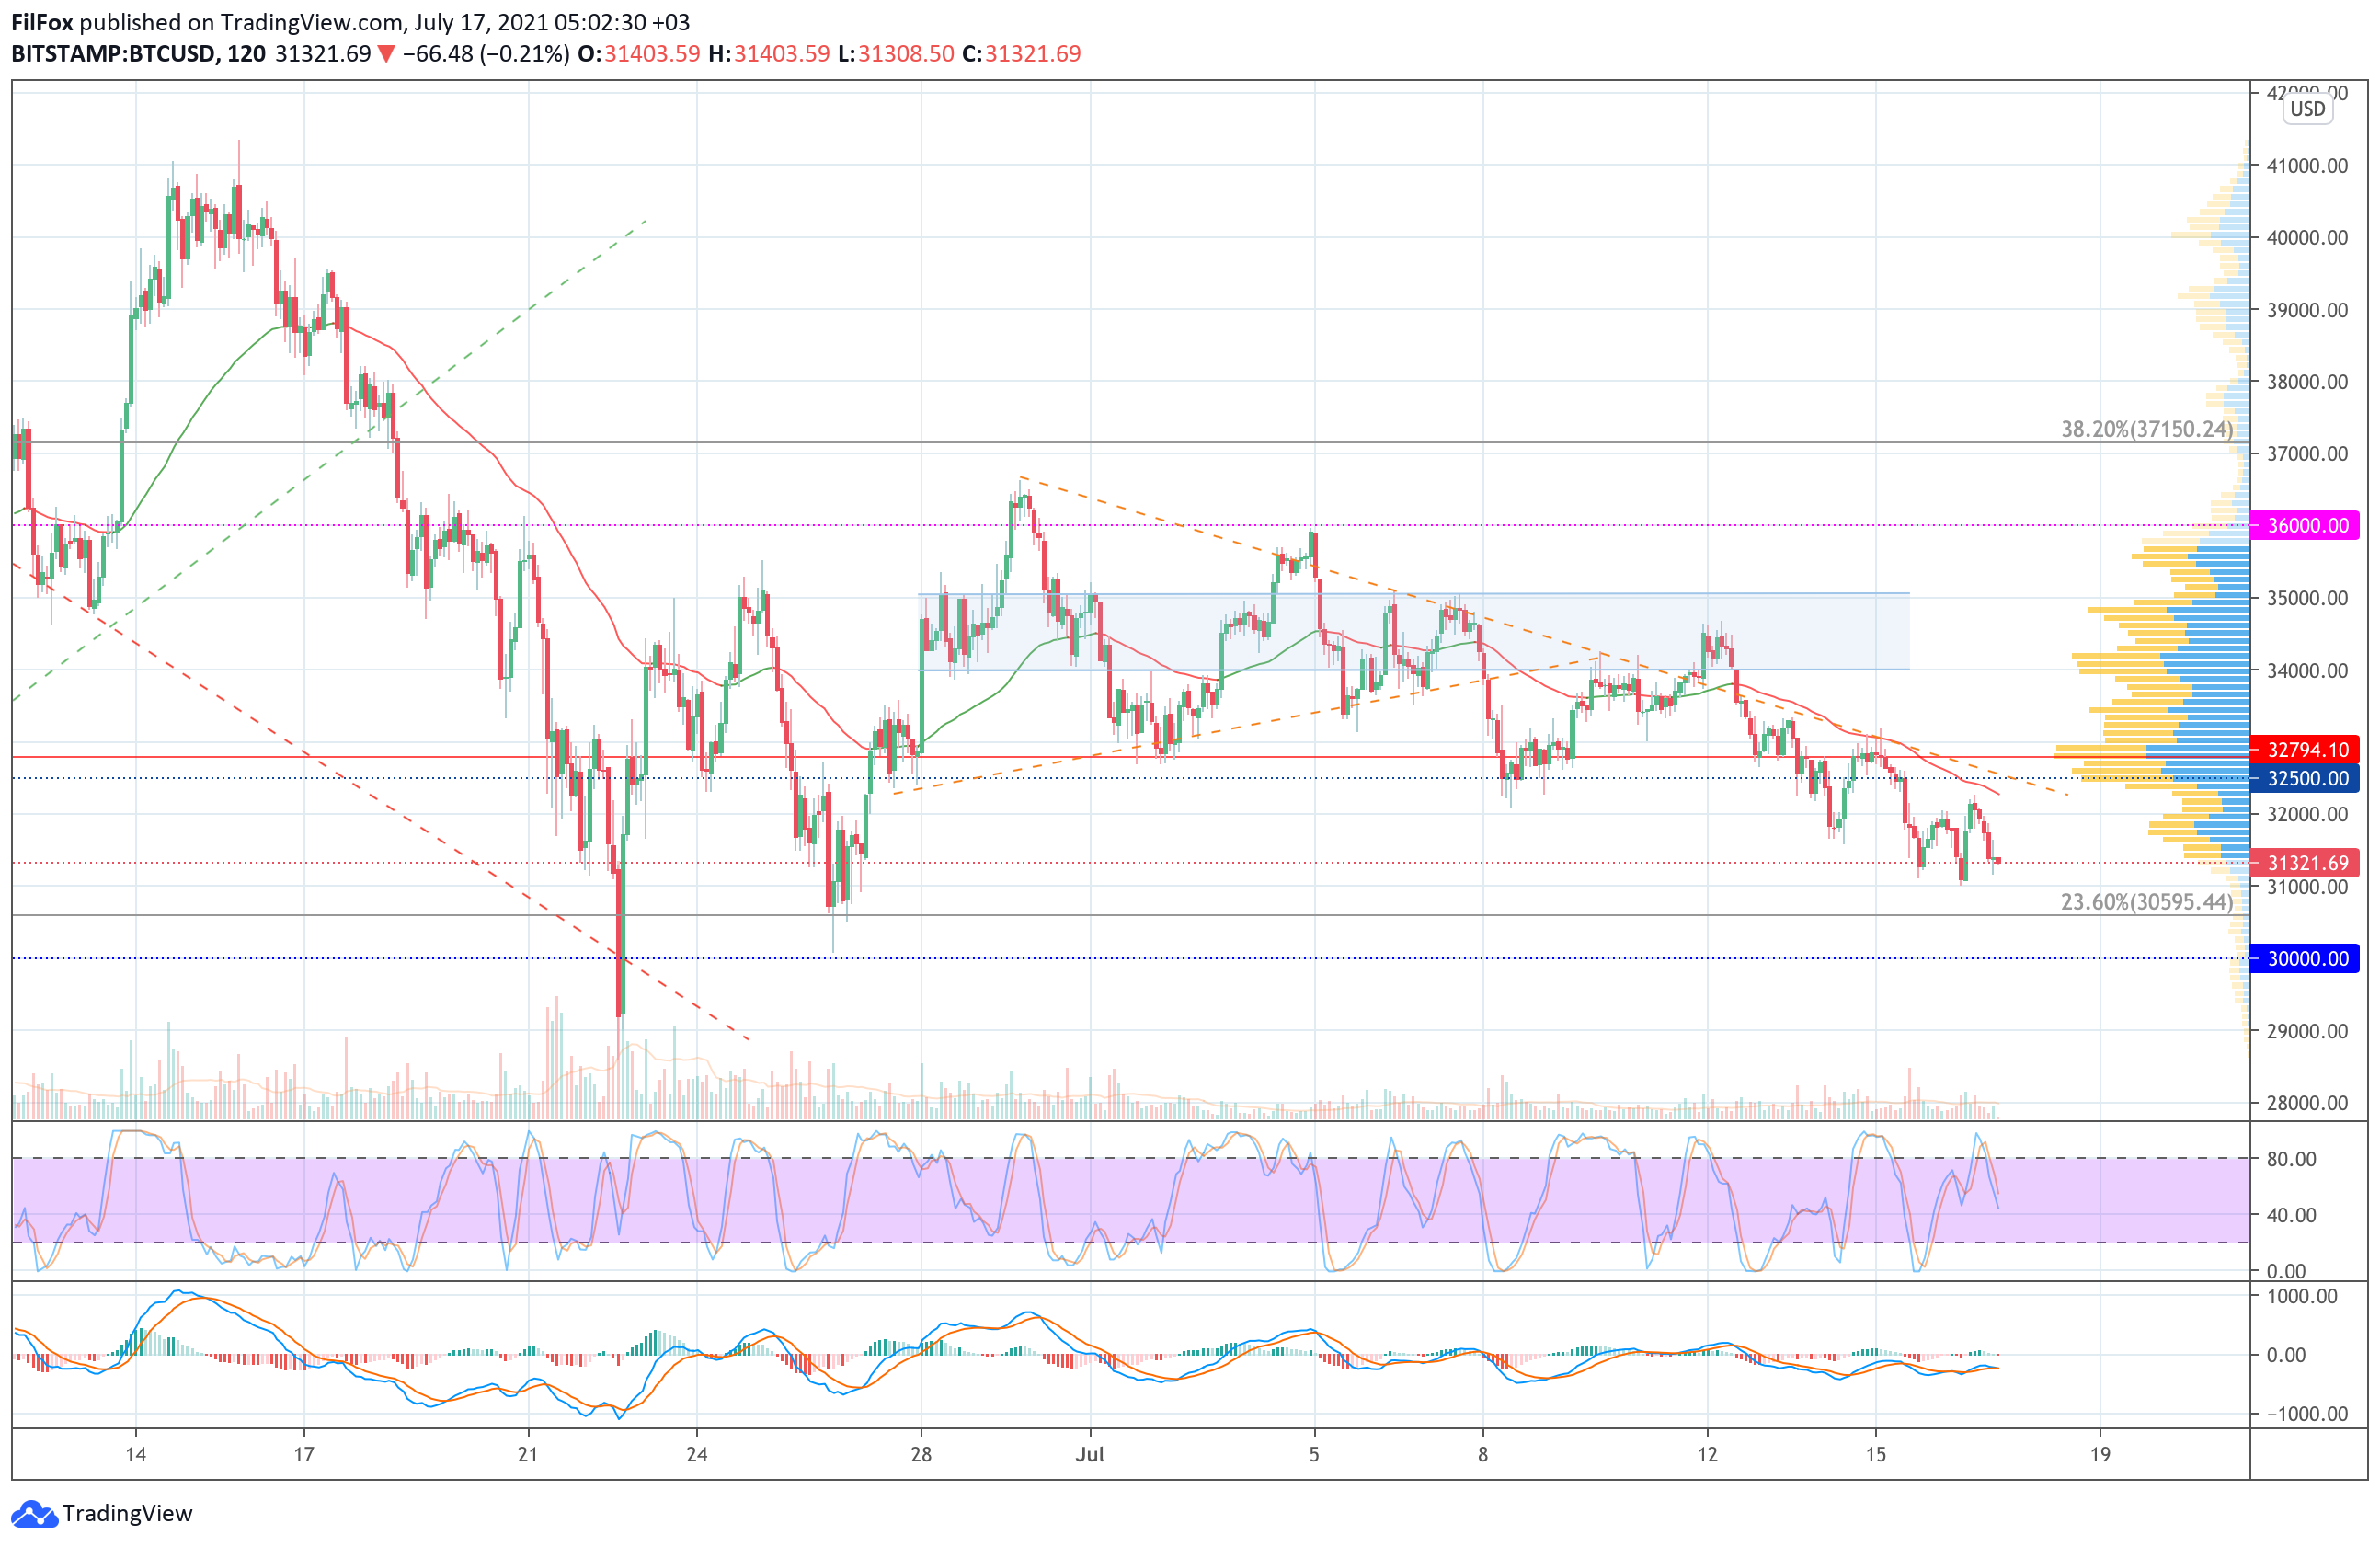 Analysis of the prices of Bitcoin, Ethereum, XRP for 07/17/2021